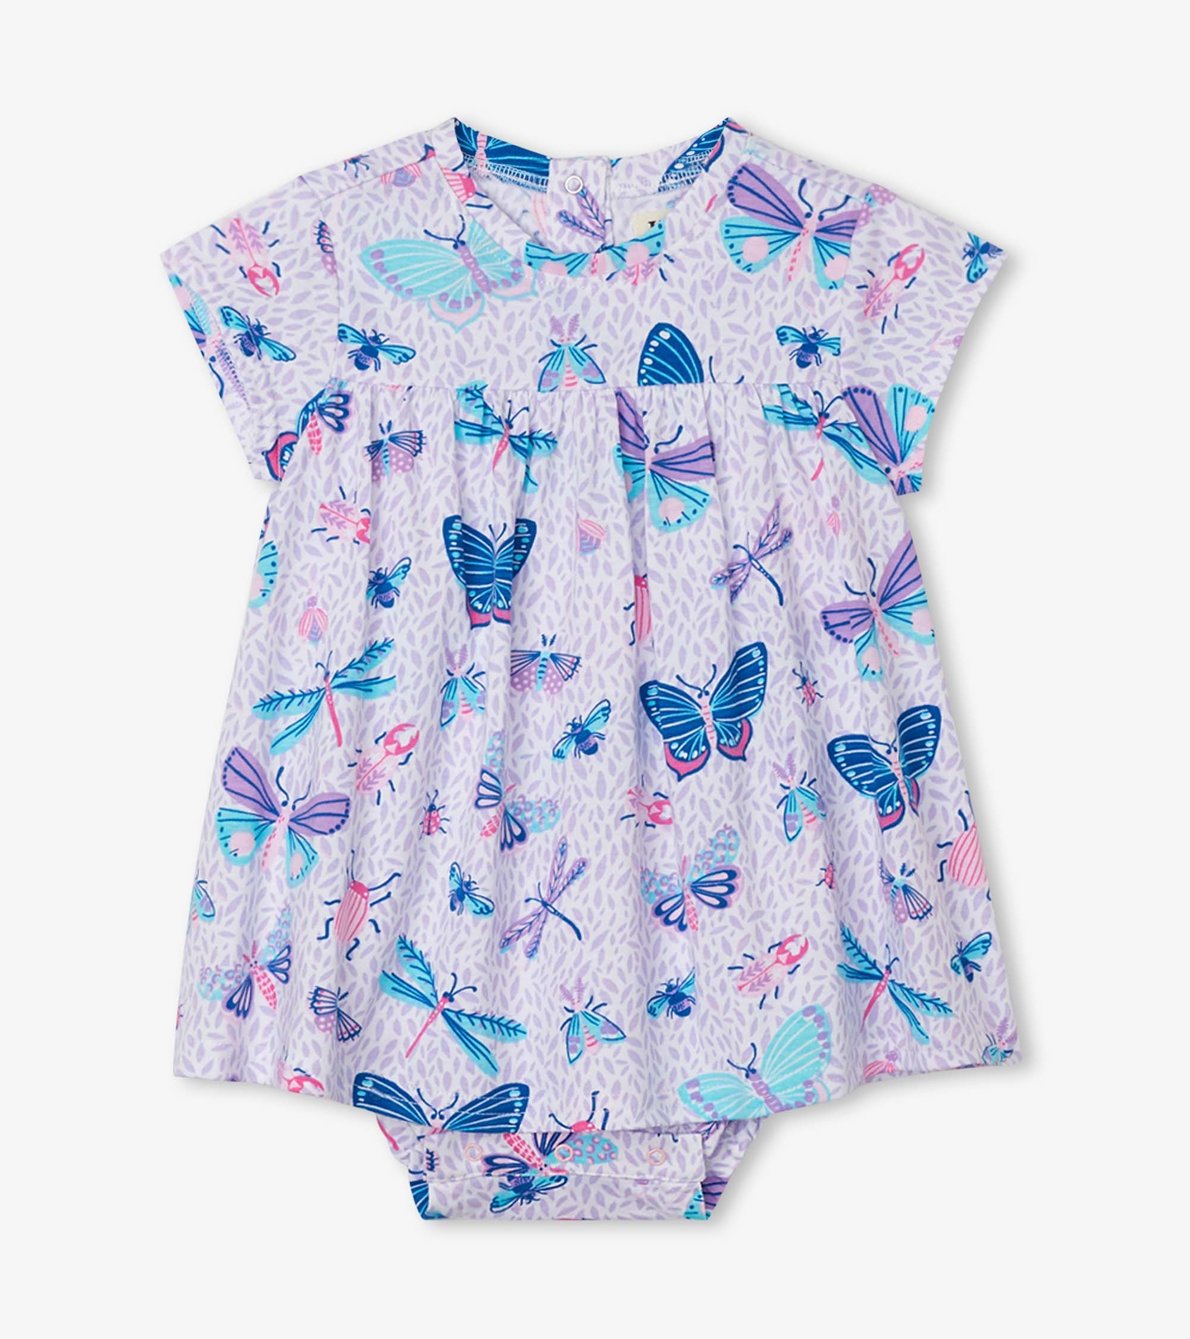 View larger image of Garden Friends Baby One-Piece Dress